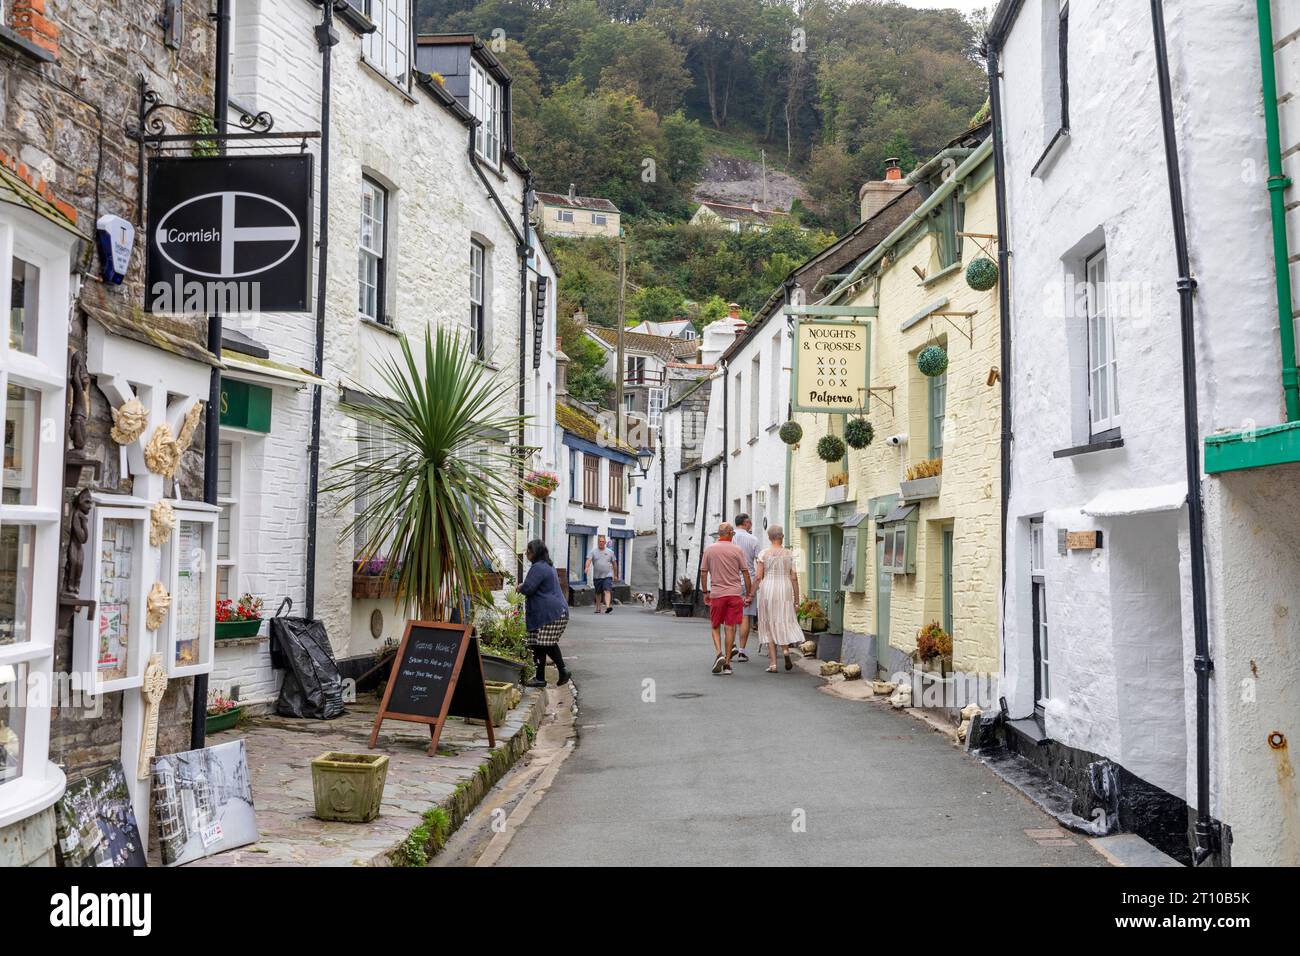 Polperro village in Cornwall, narrow street lane of village cottages and homes along with the Cornish flag standard,Cornwall,England,UK,2023 Stock Photo